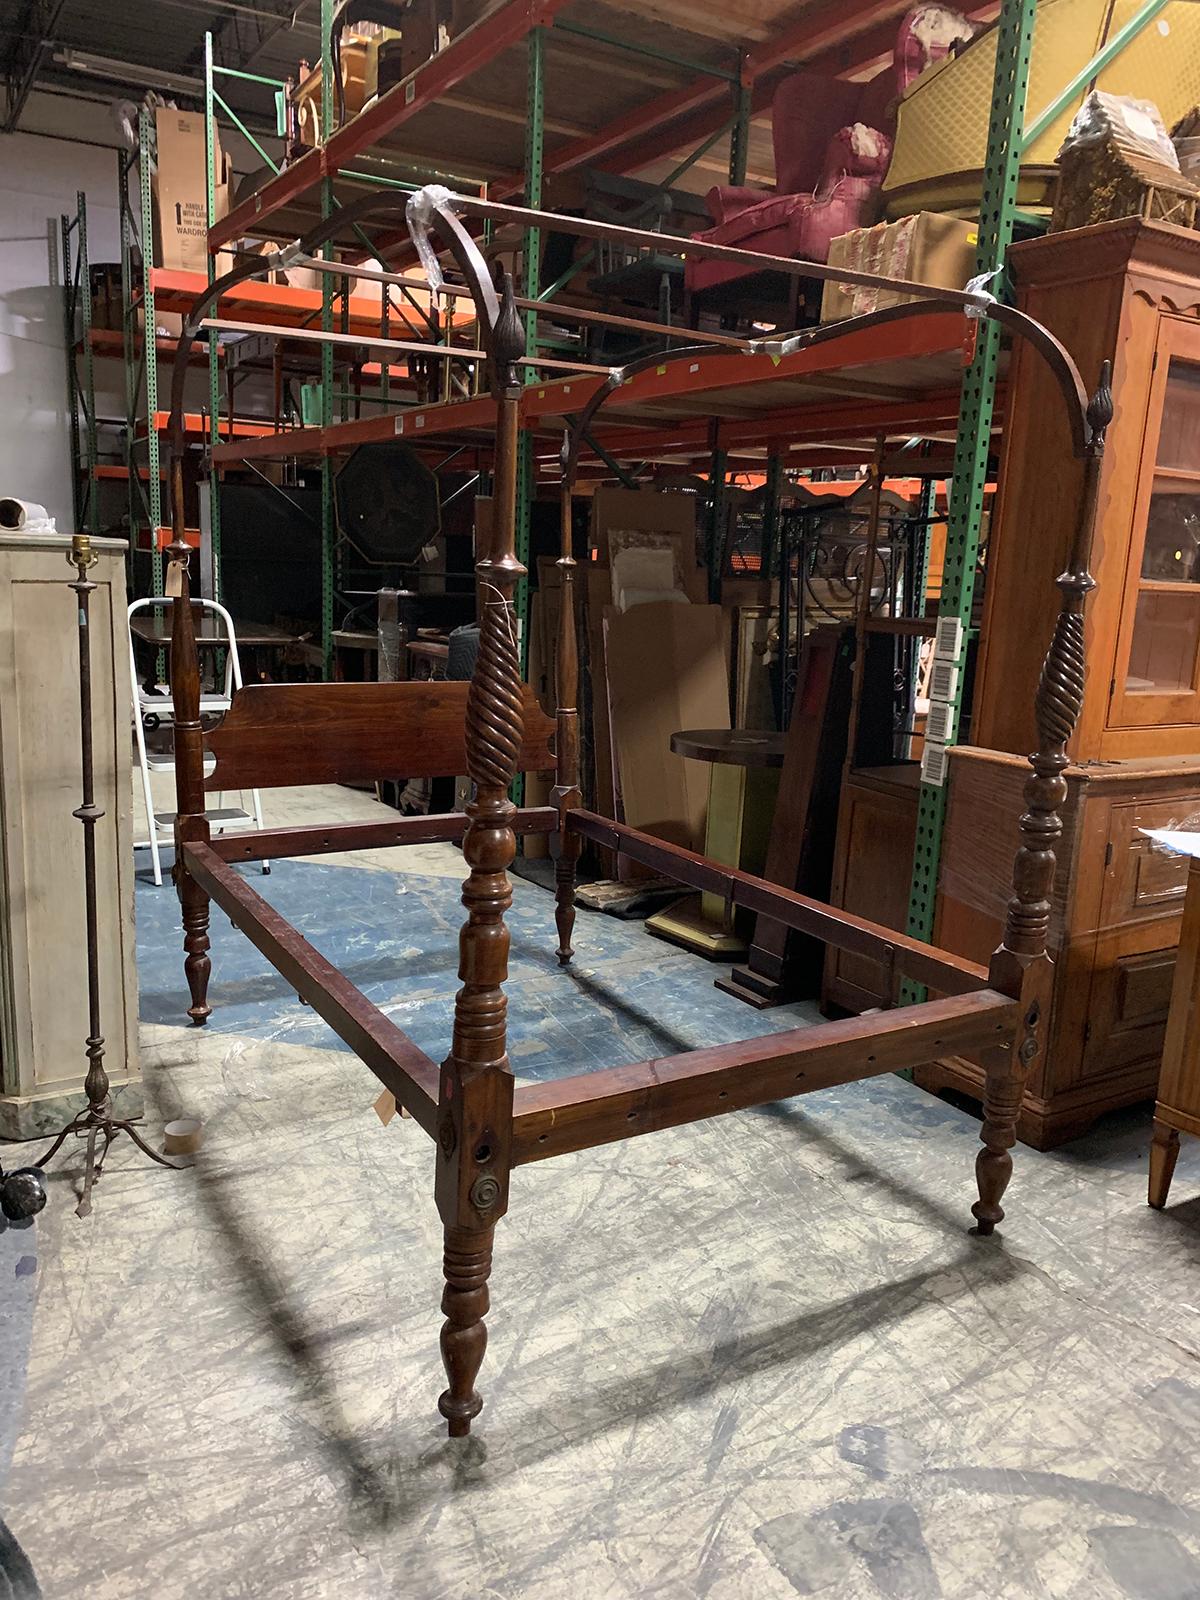 19th century canopy bed
Overall dimensions: 51